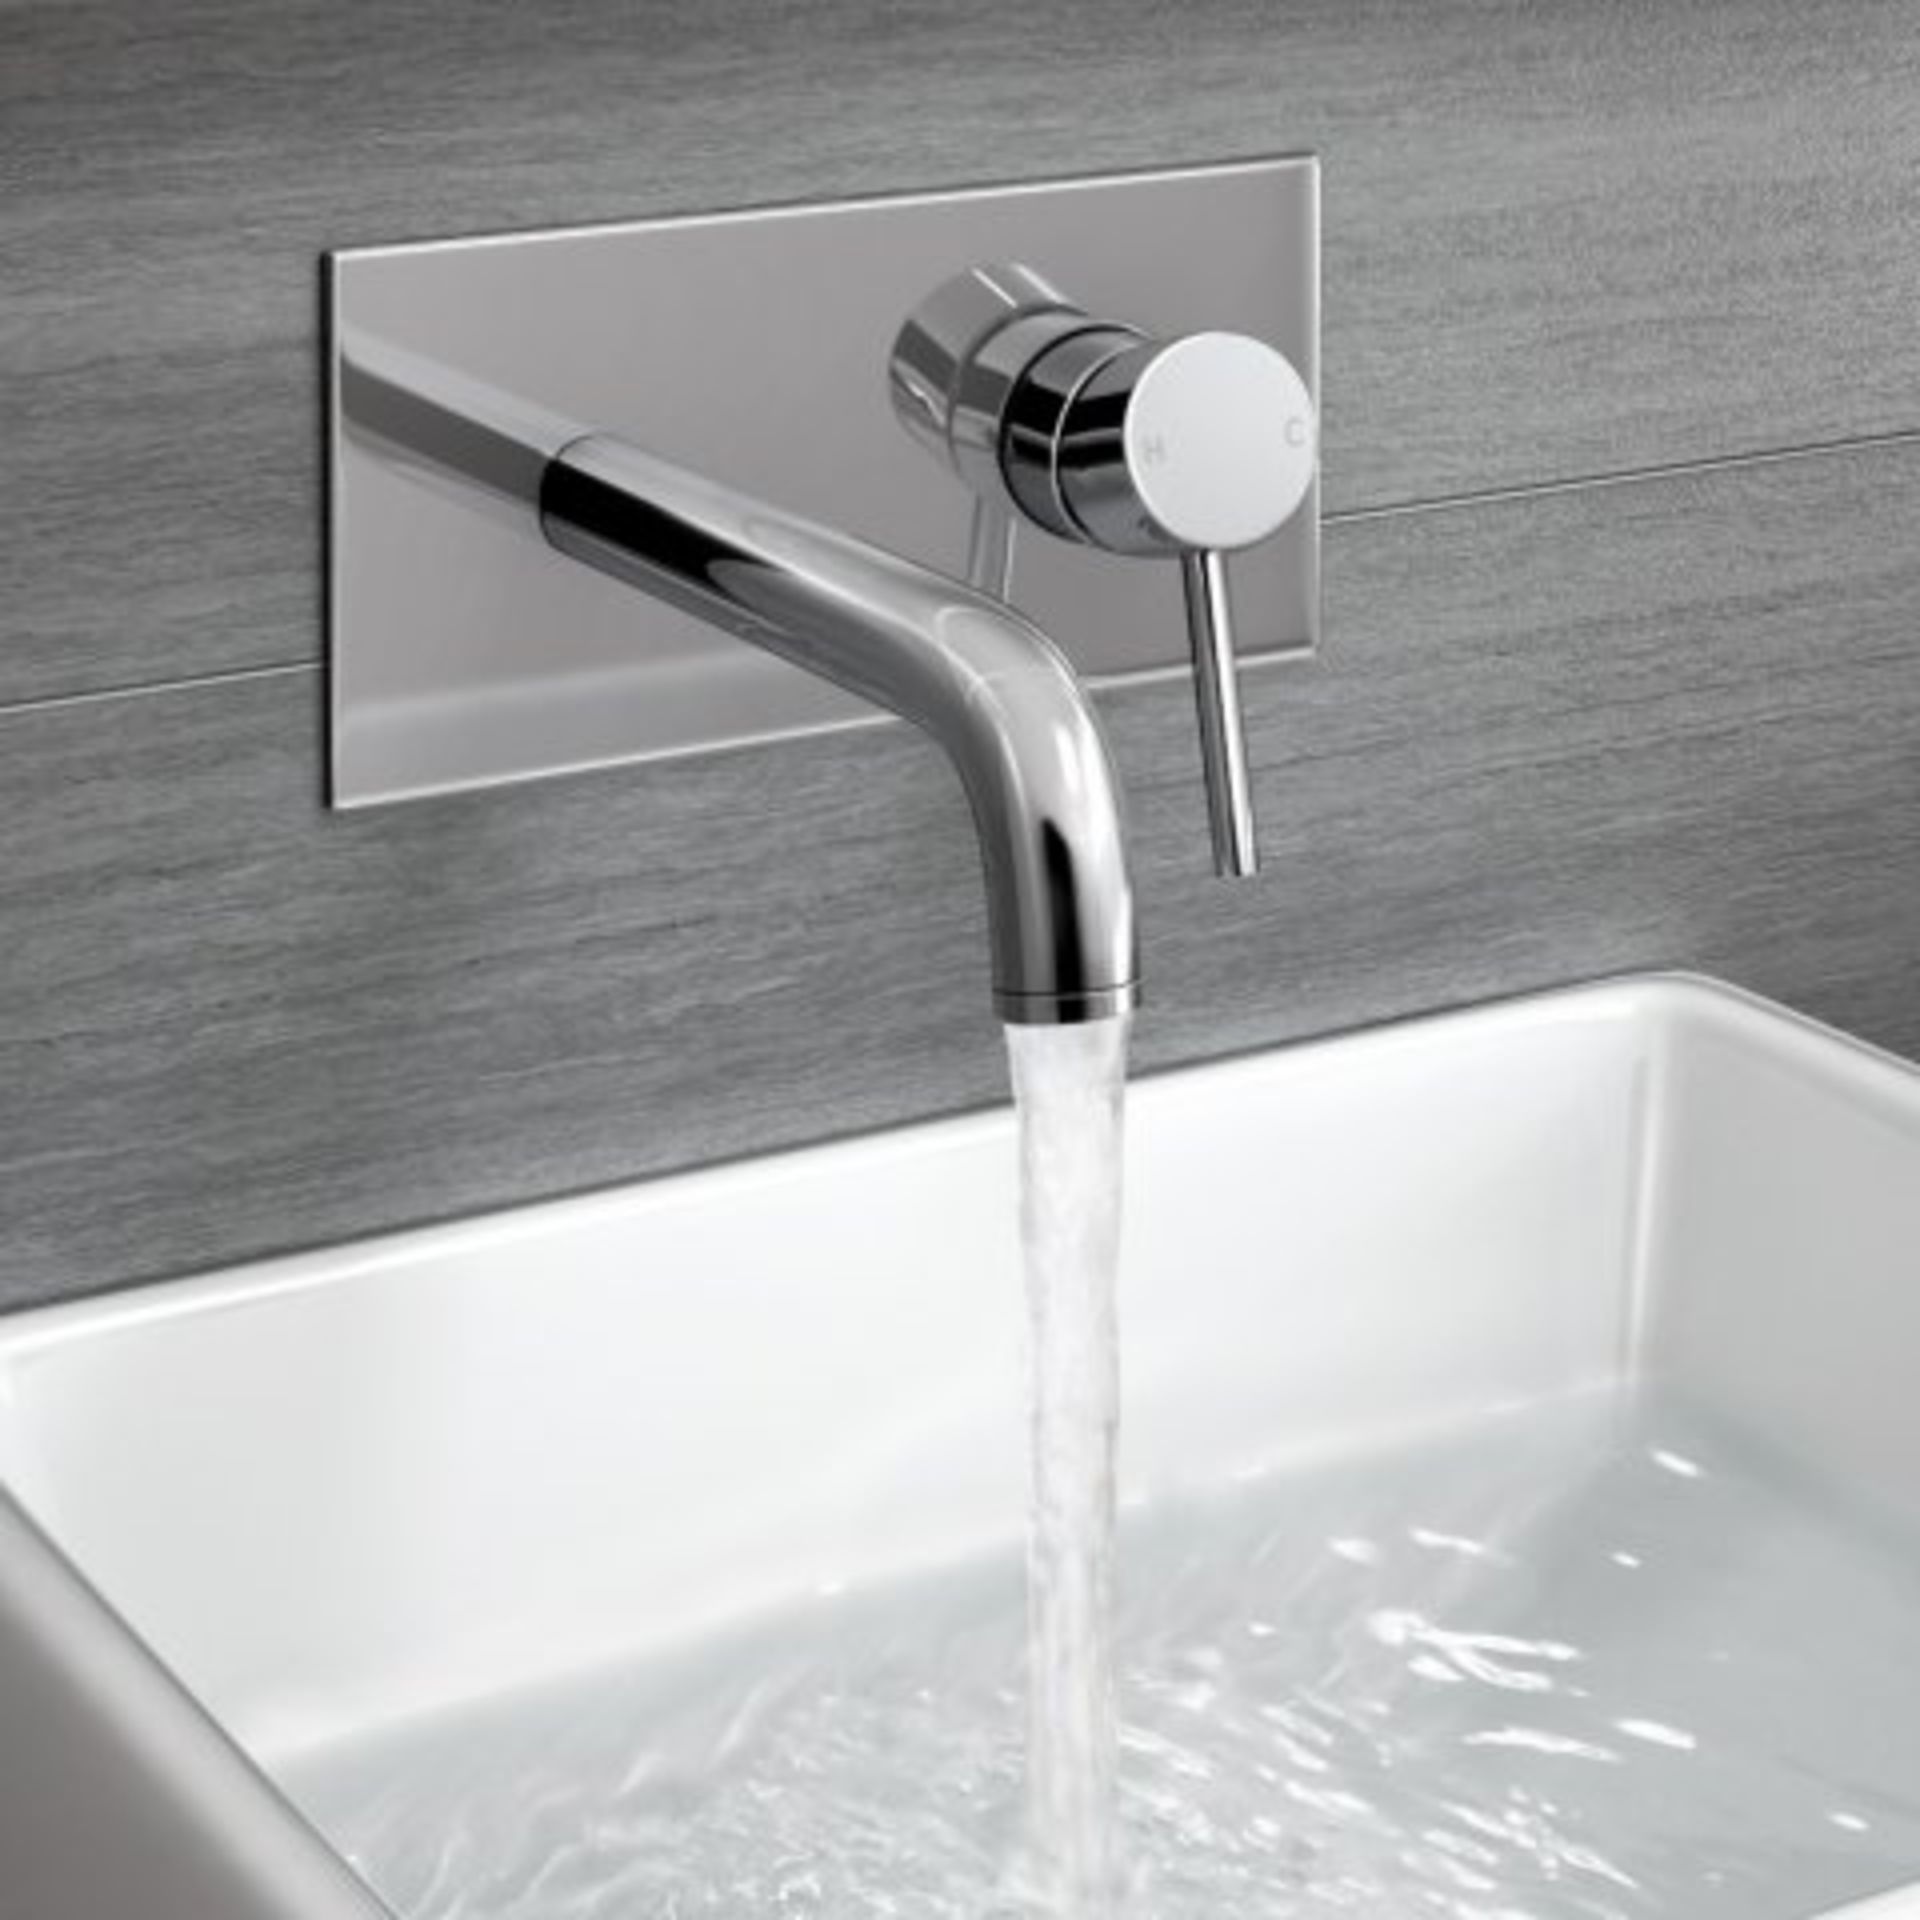 (I160) Gladstone Wall Mounted Basin Mixer Our Gladstone Range of taps are thoughtfully designed to